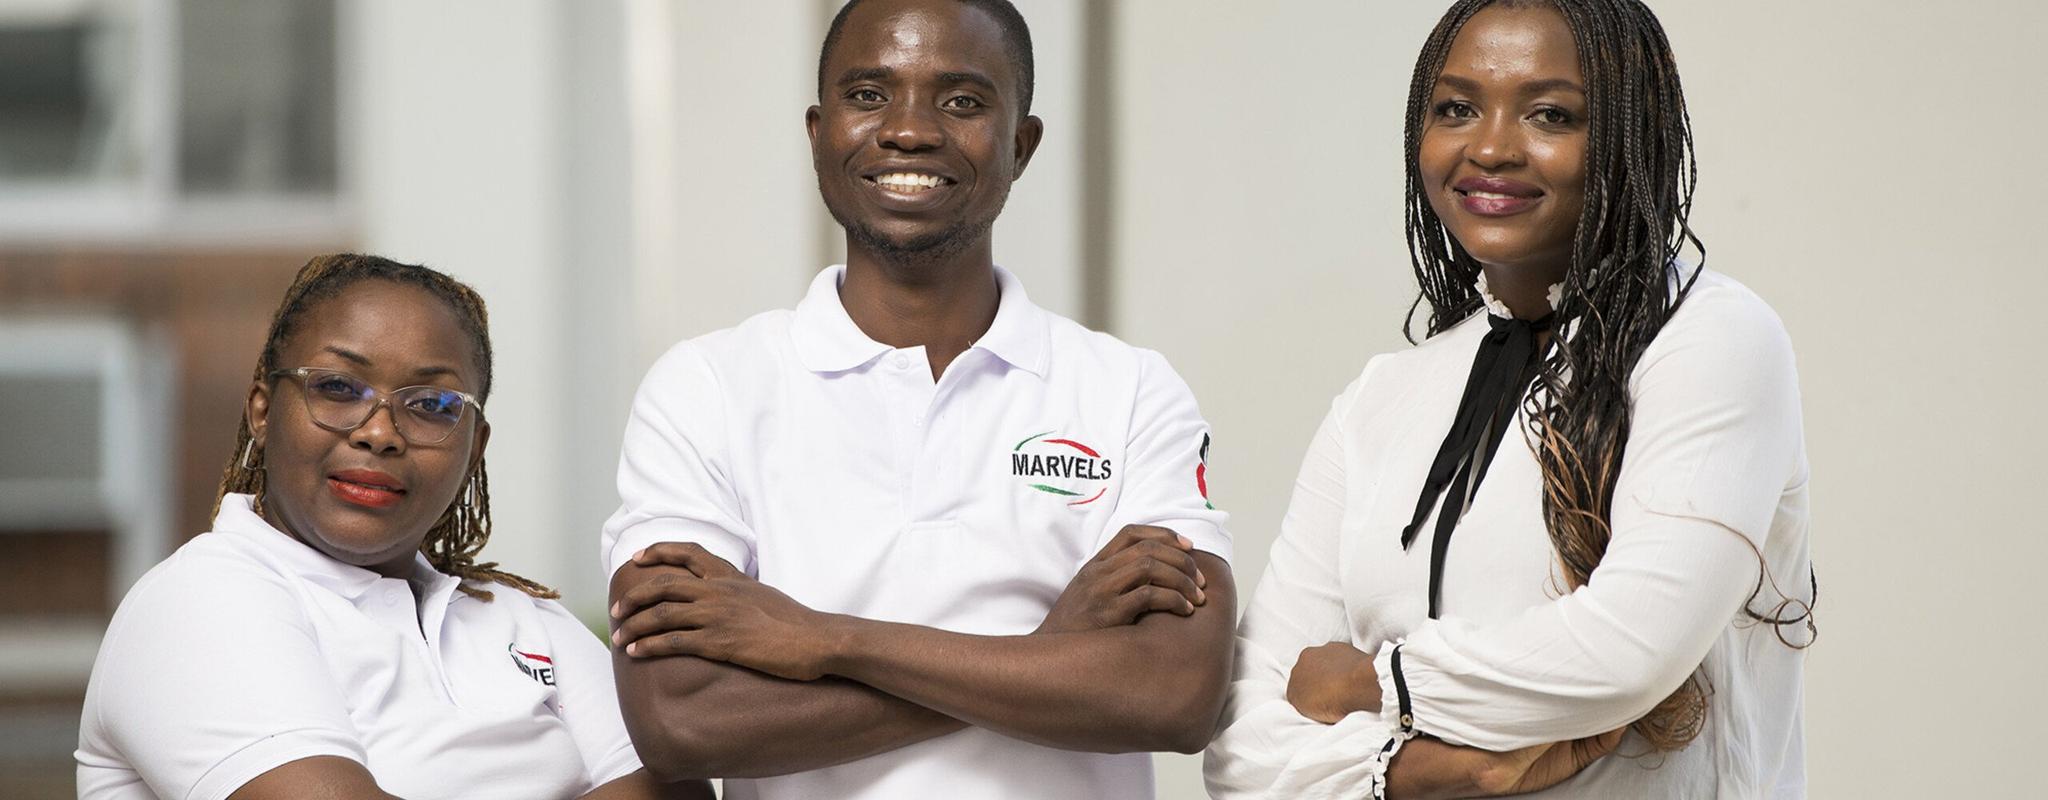 Dr Dingase Dula, a young black woman, stands smiling with her arms crossed next to two of the volunteers from her research study. The volunteers are wearing crisp white polo shirts branded with the word 'Marvels', and are also smiling with their arms crossed.